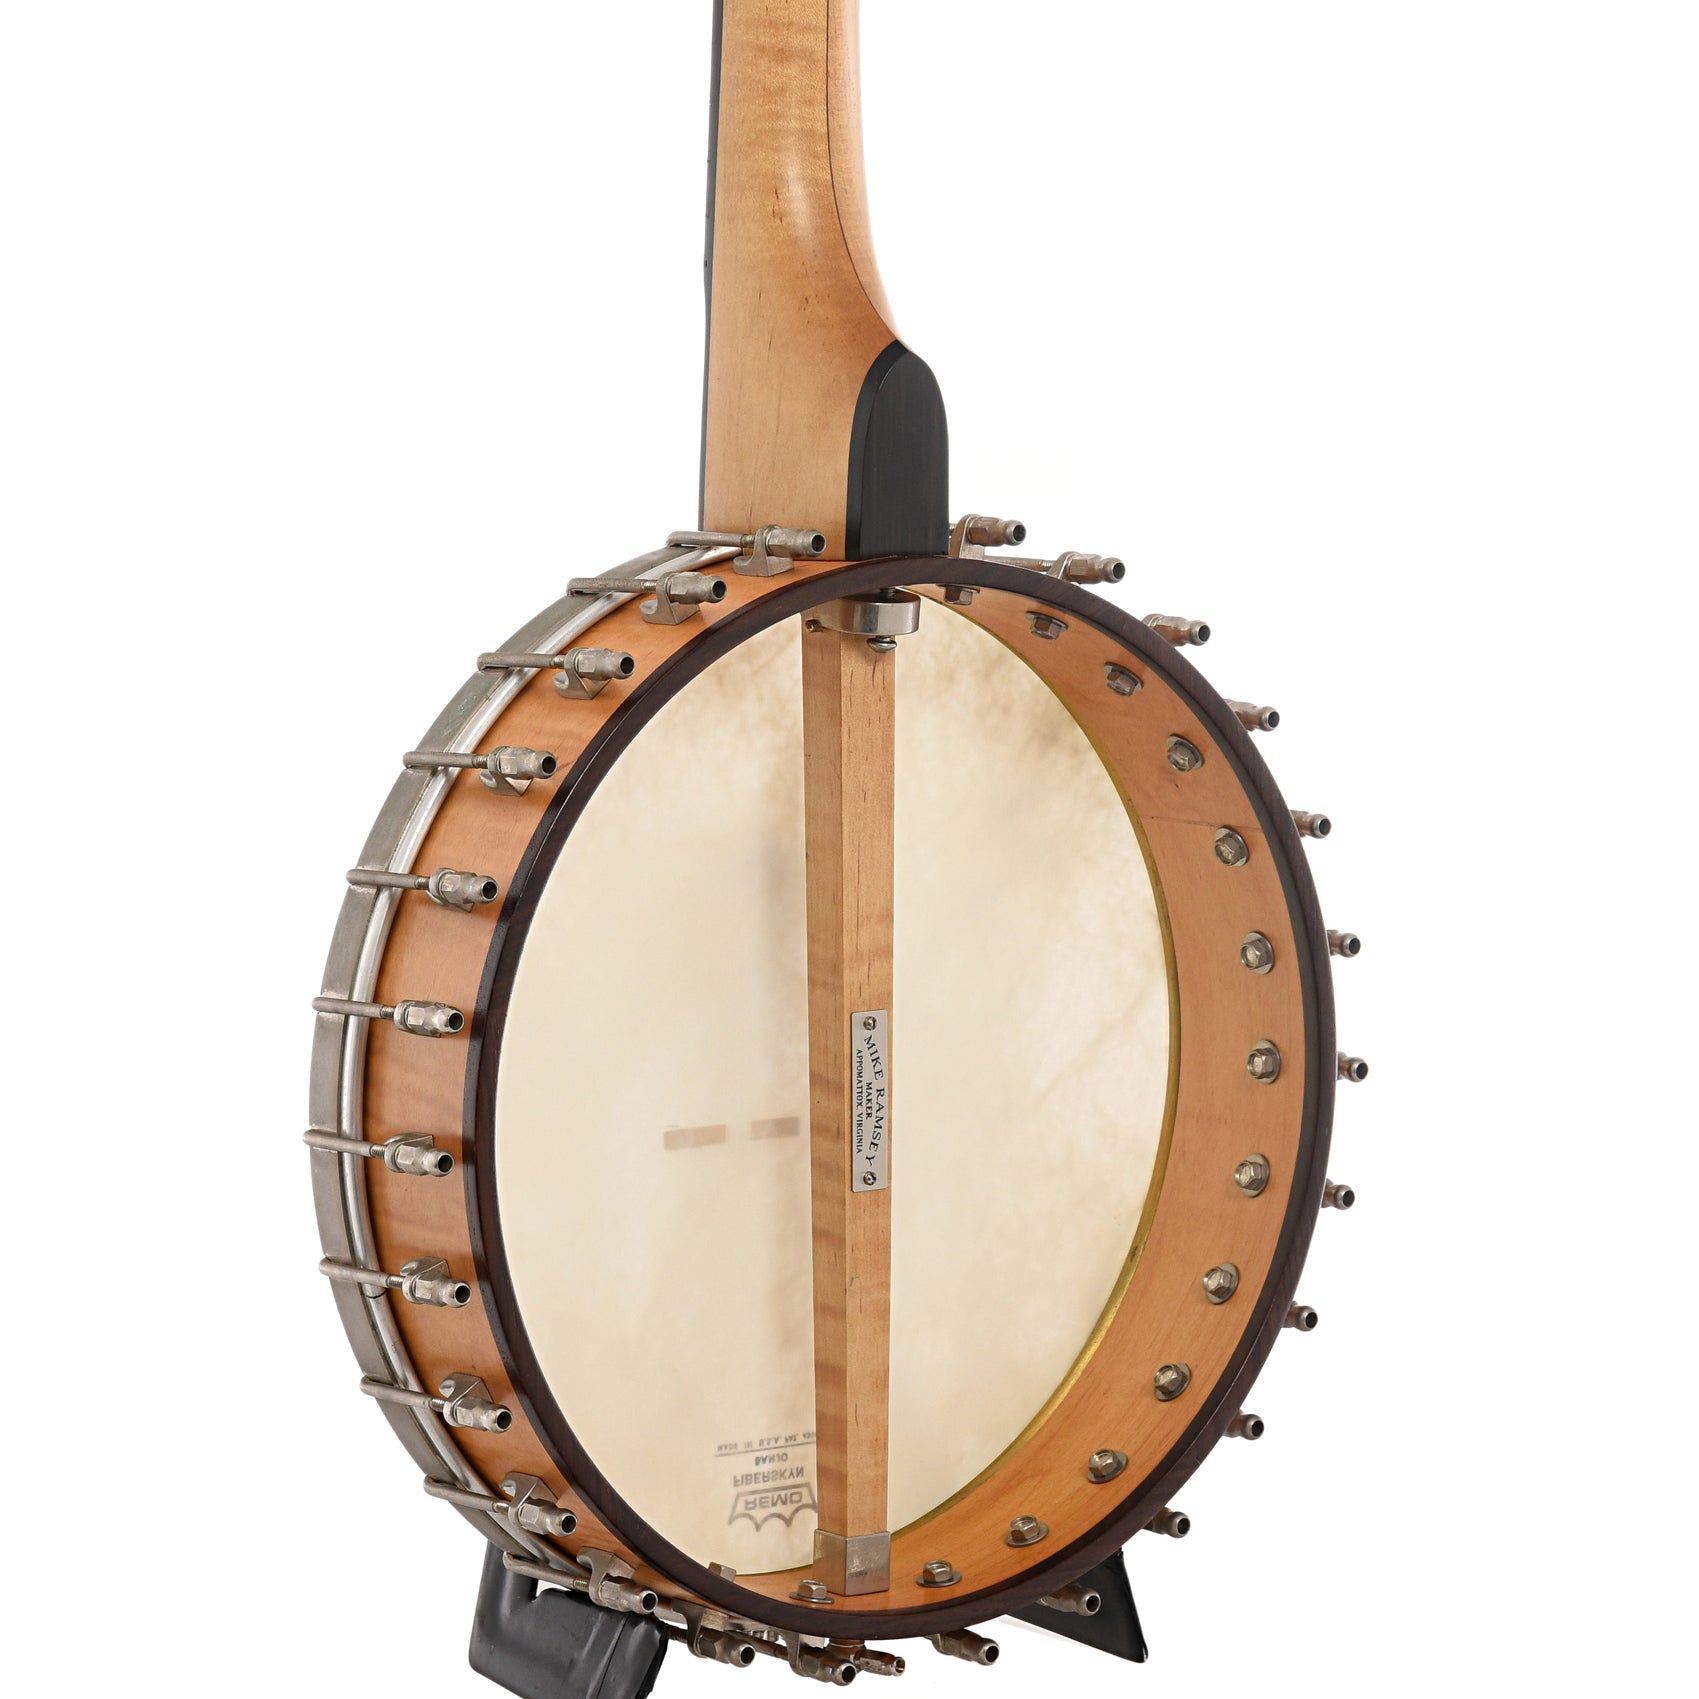 Back and side of Chanterelle Maple Special 12" Open Back Banjo